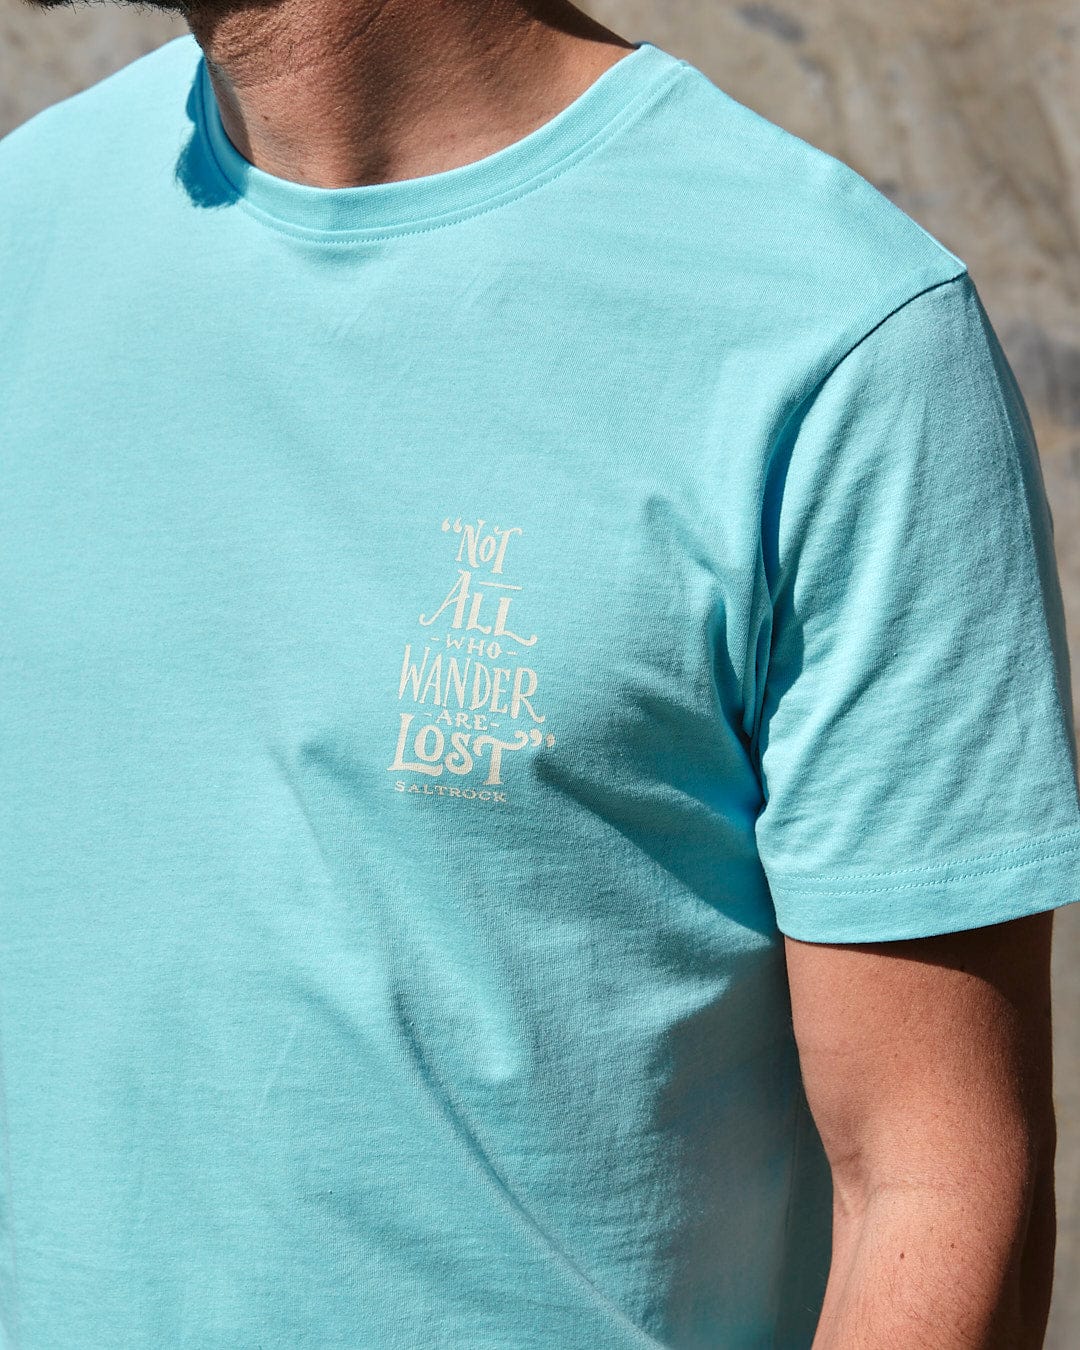 A man wearing a Lost Ships - Mens Short Sleeve T-Shirt - Turquoise by Saltrock with branding on it.